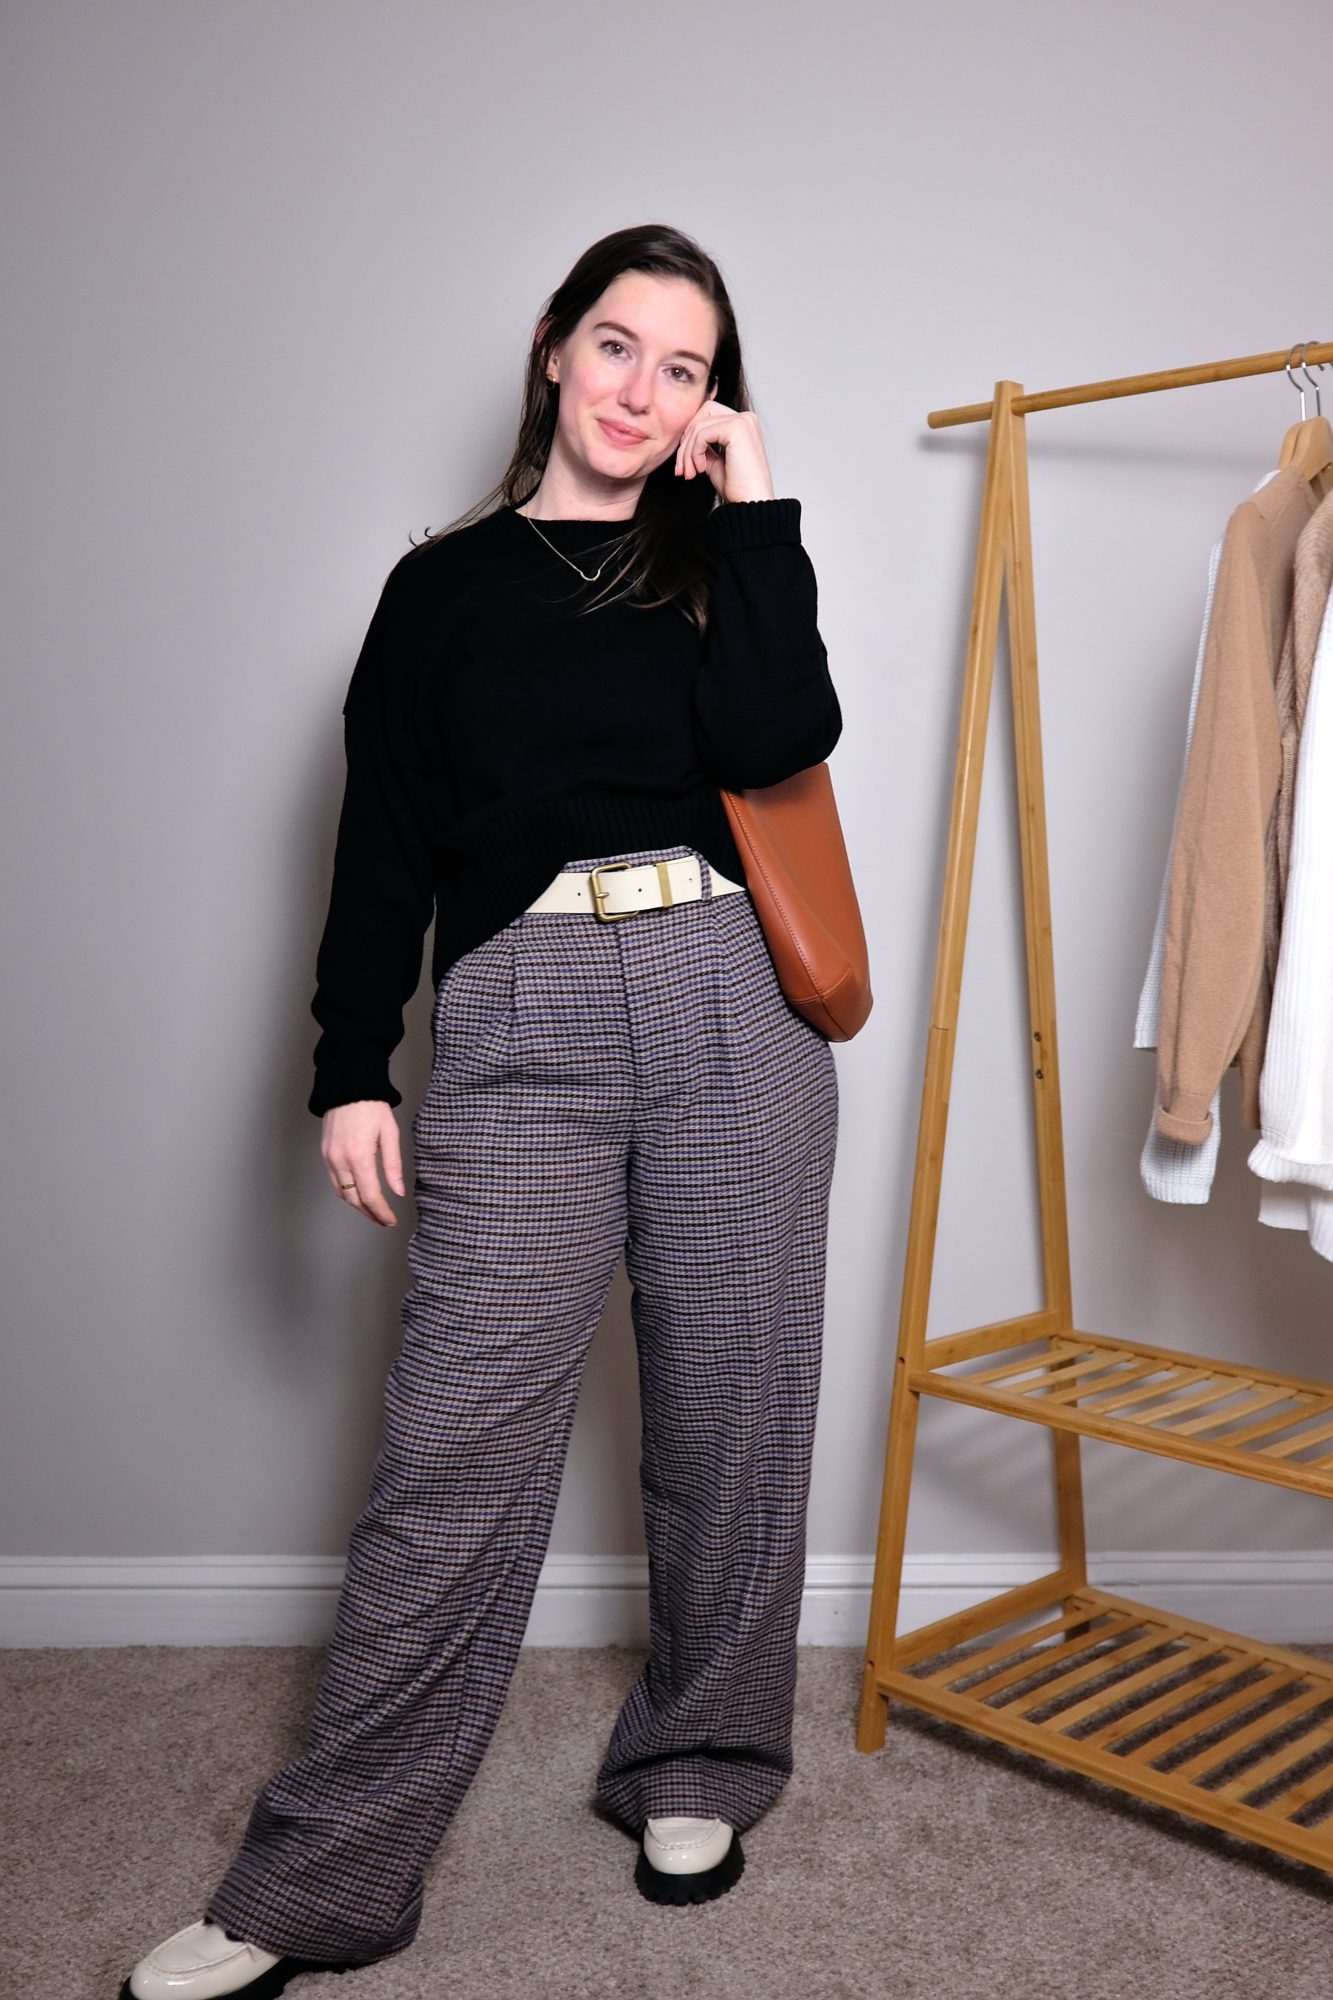 Alyssa wears a black sweater with plaid wool pants and white loafers with the Everlane bag